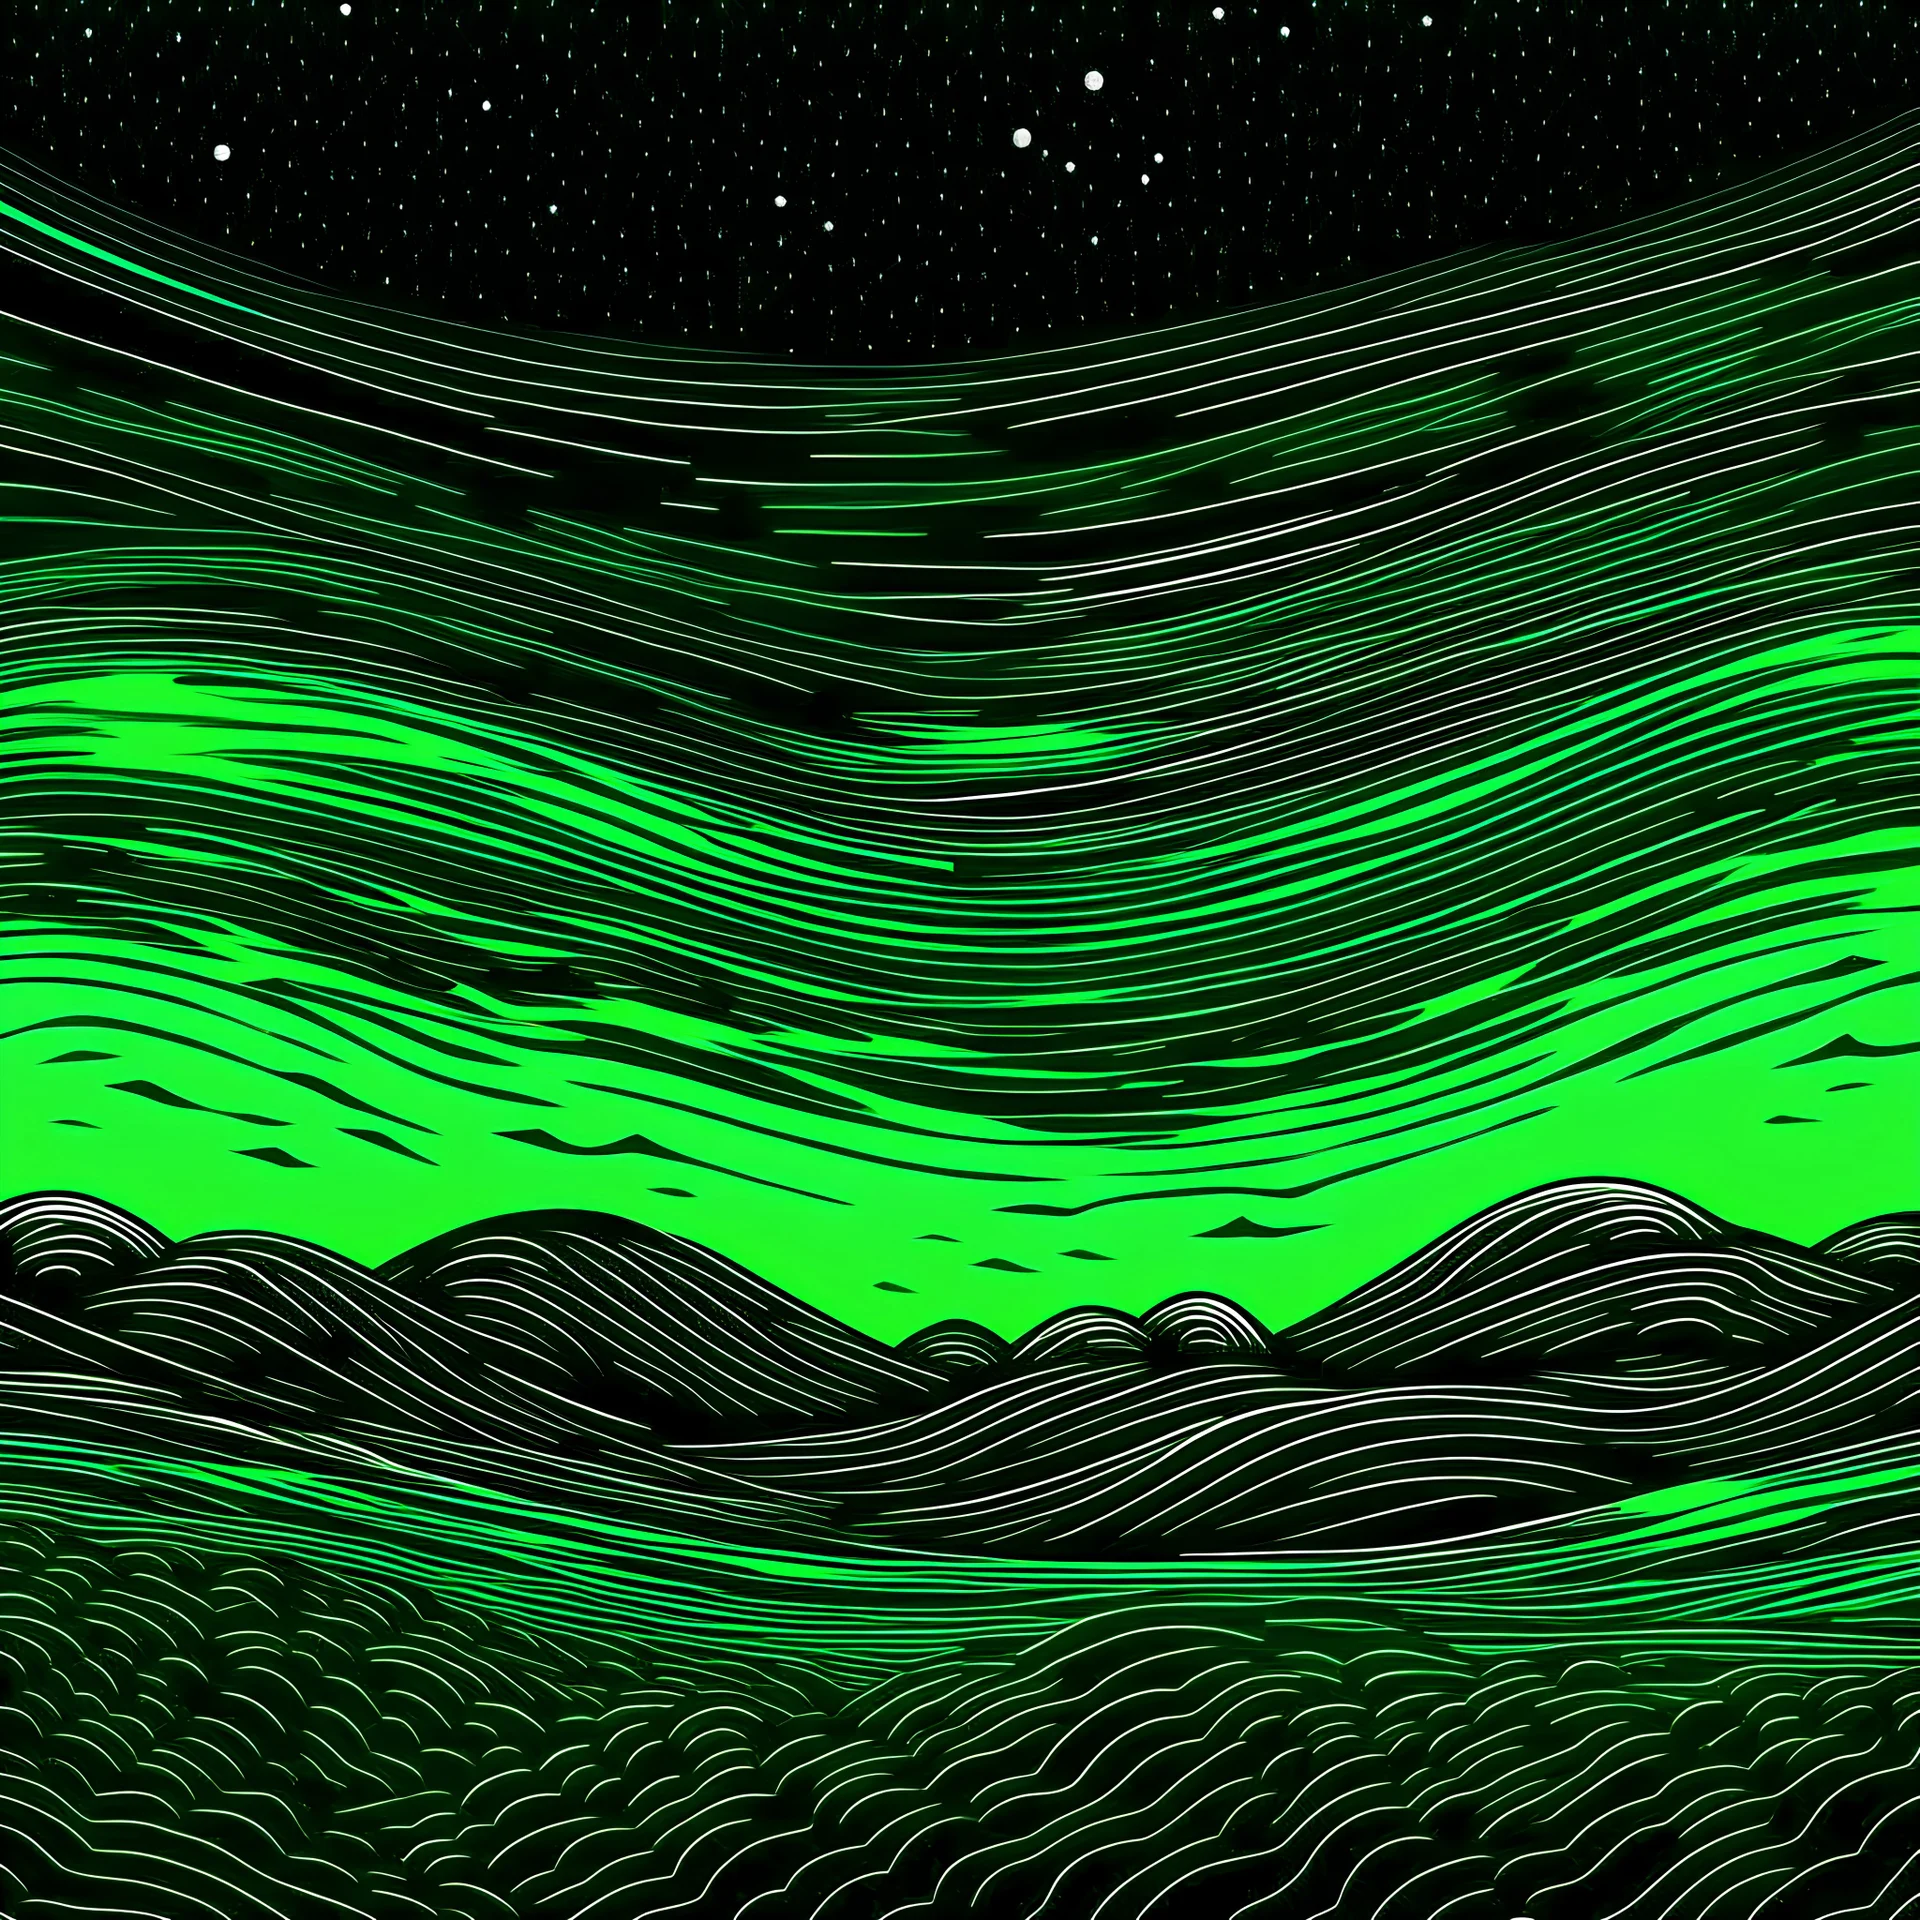 stars on a trippy green color horizon